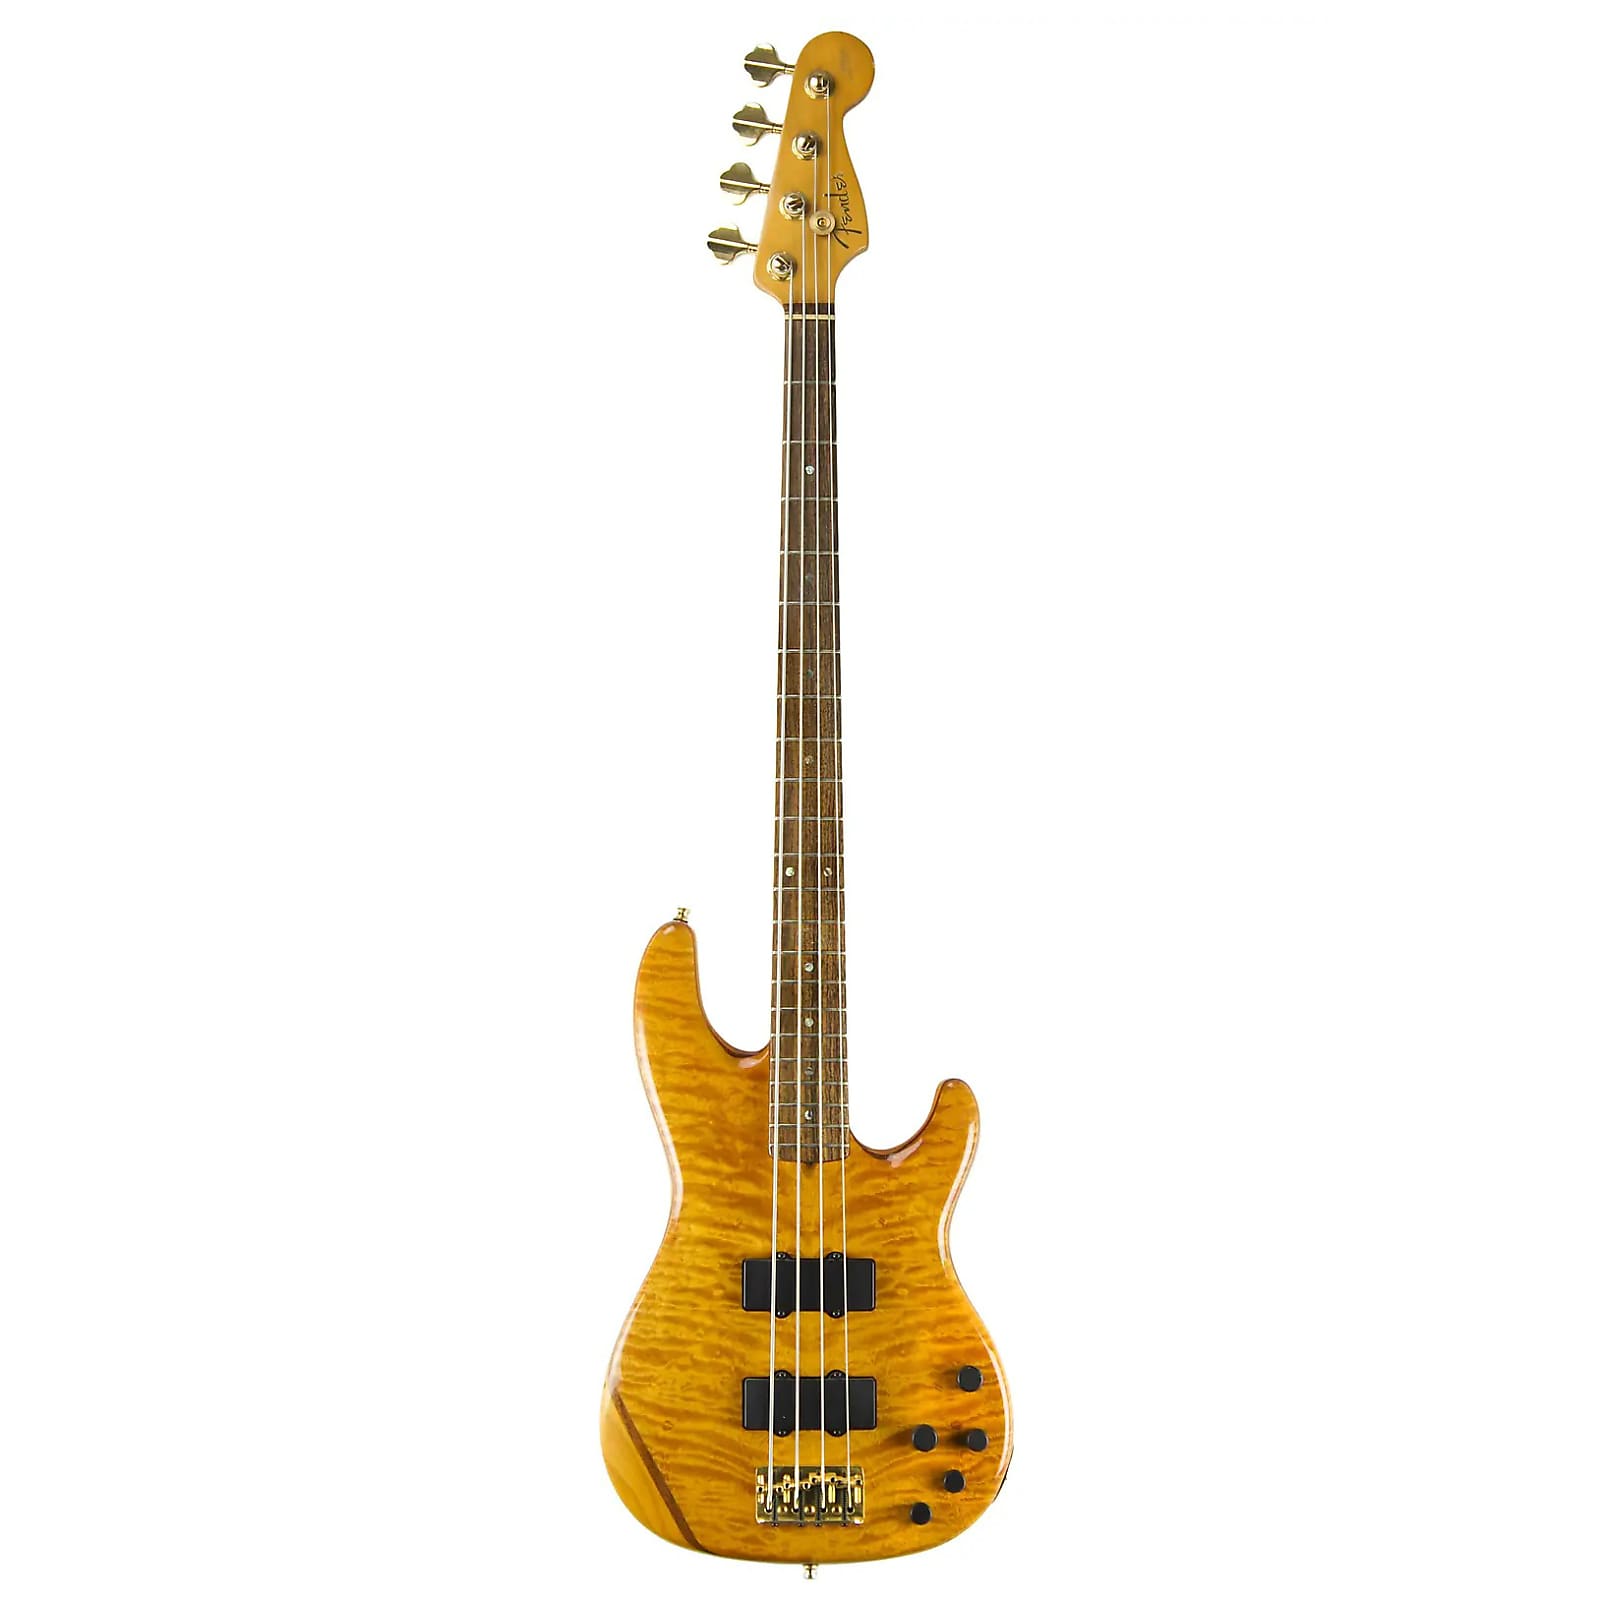 Fender American Deluxe Zone Bass 2001 - 2006 | Reverb